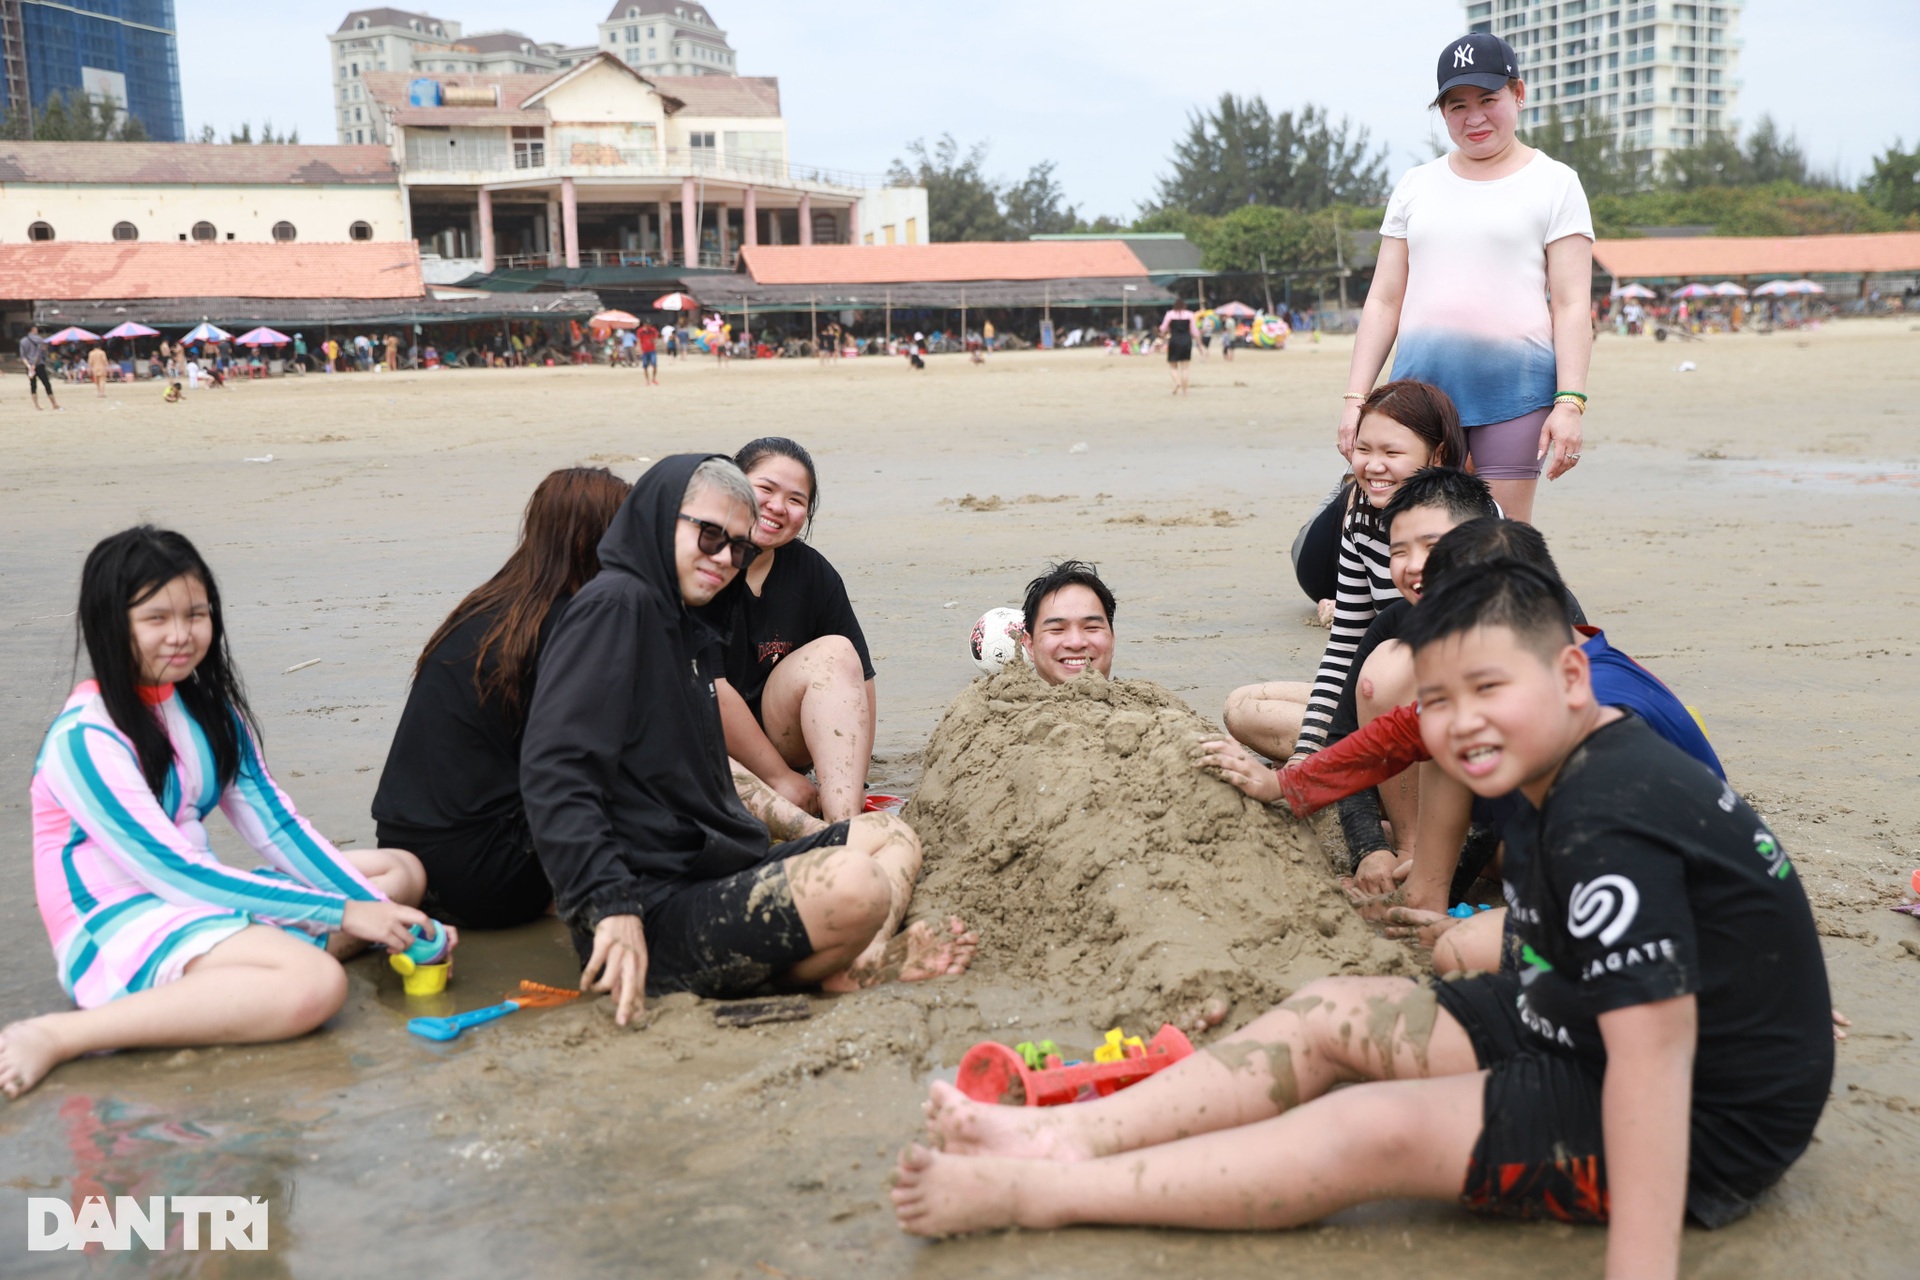 People flock to the beach in the Tau region on the 4th of Tet - 7